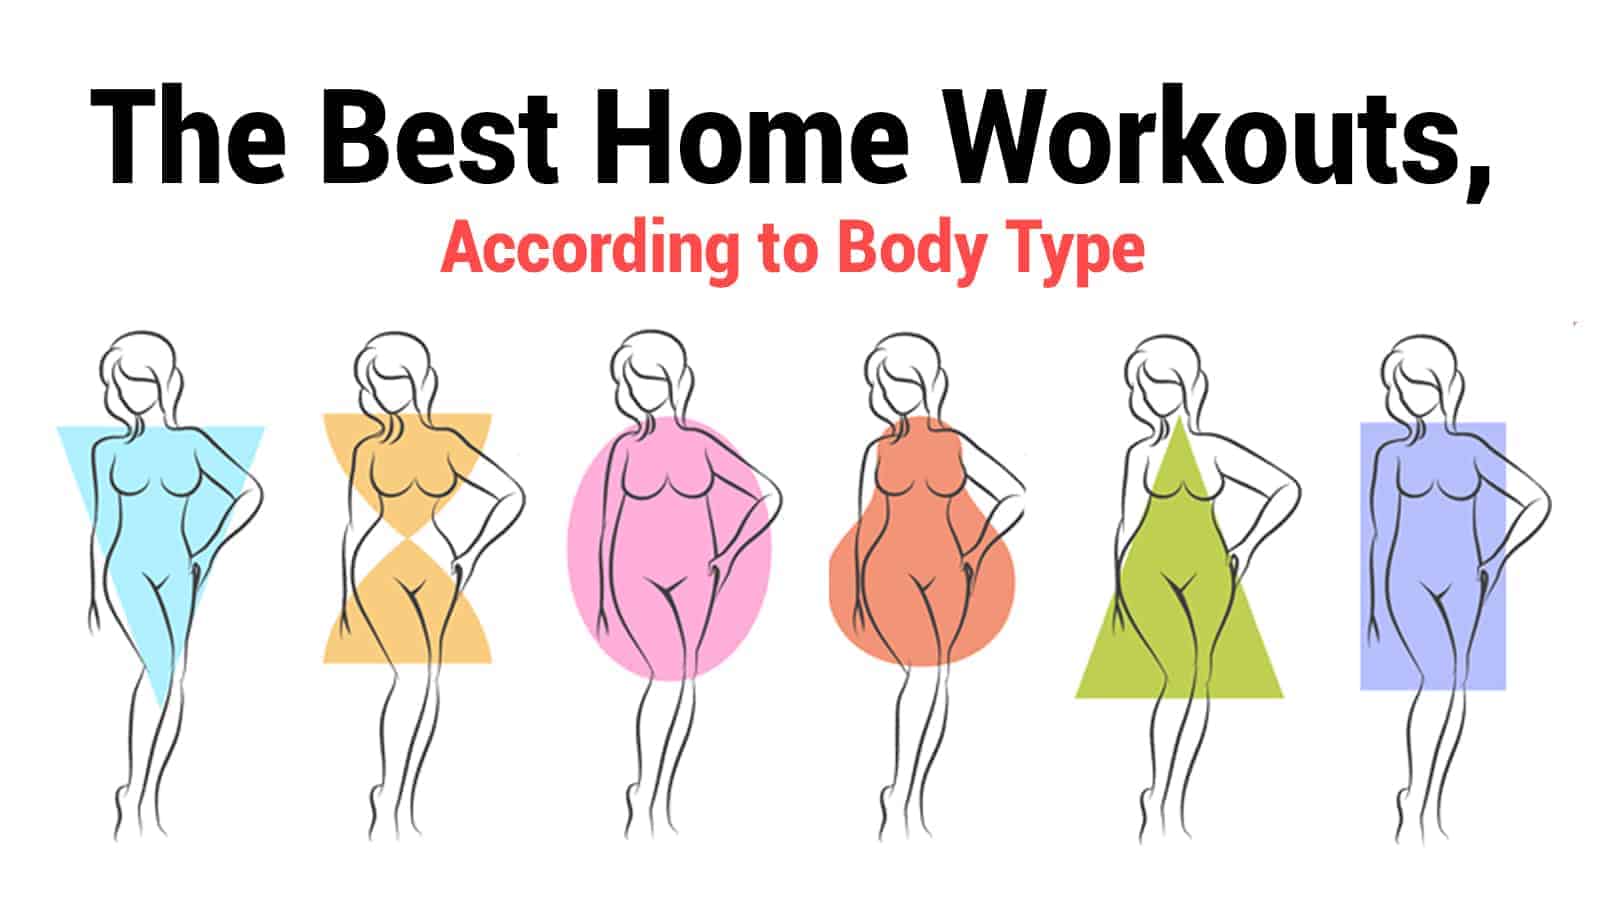 The Best Home Workouts, According to Body Type